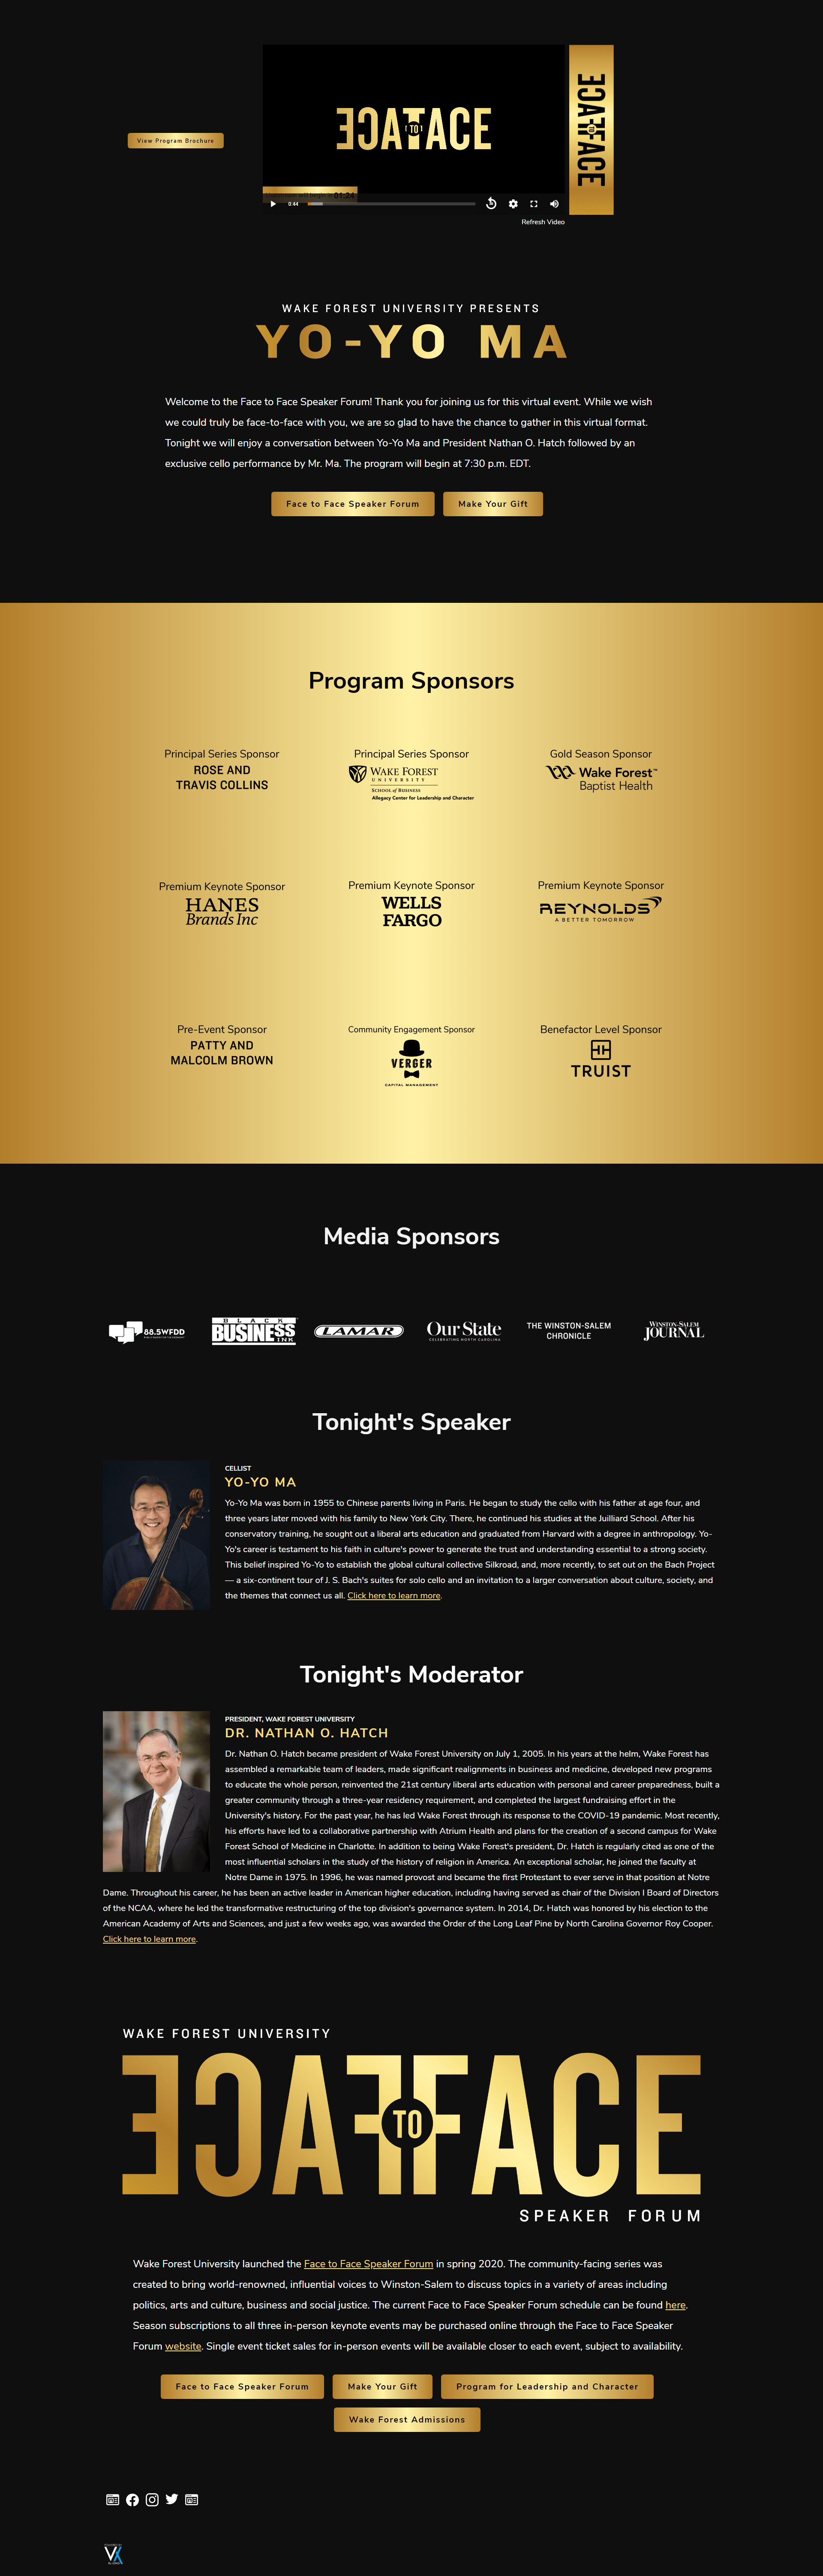 A sample watch page that has their video, sponsors, and speakers.